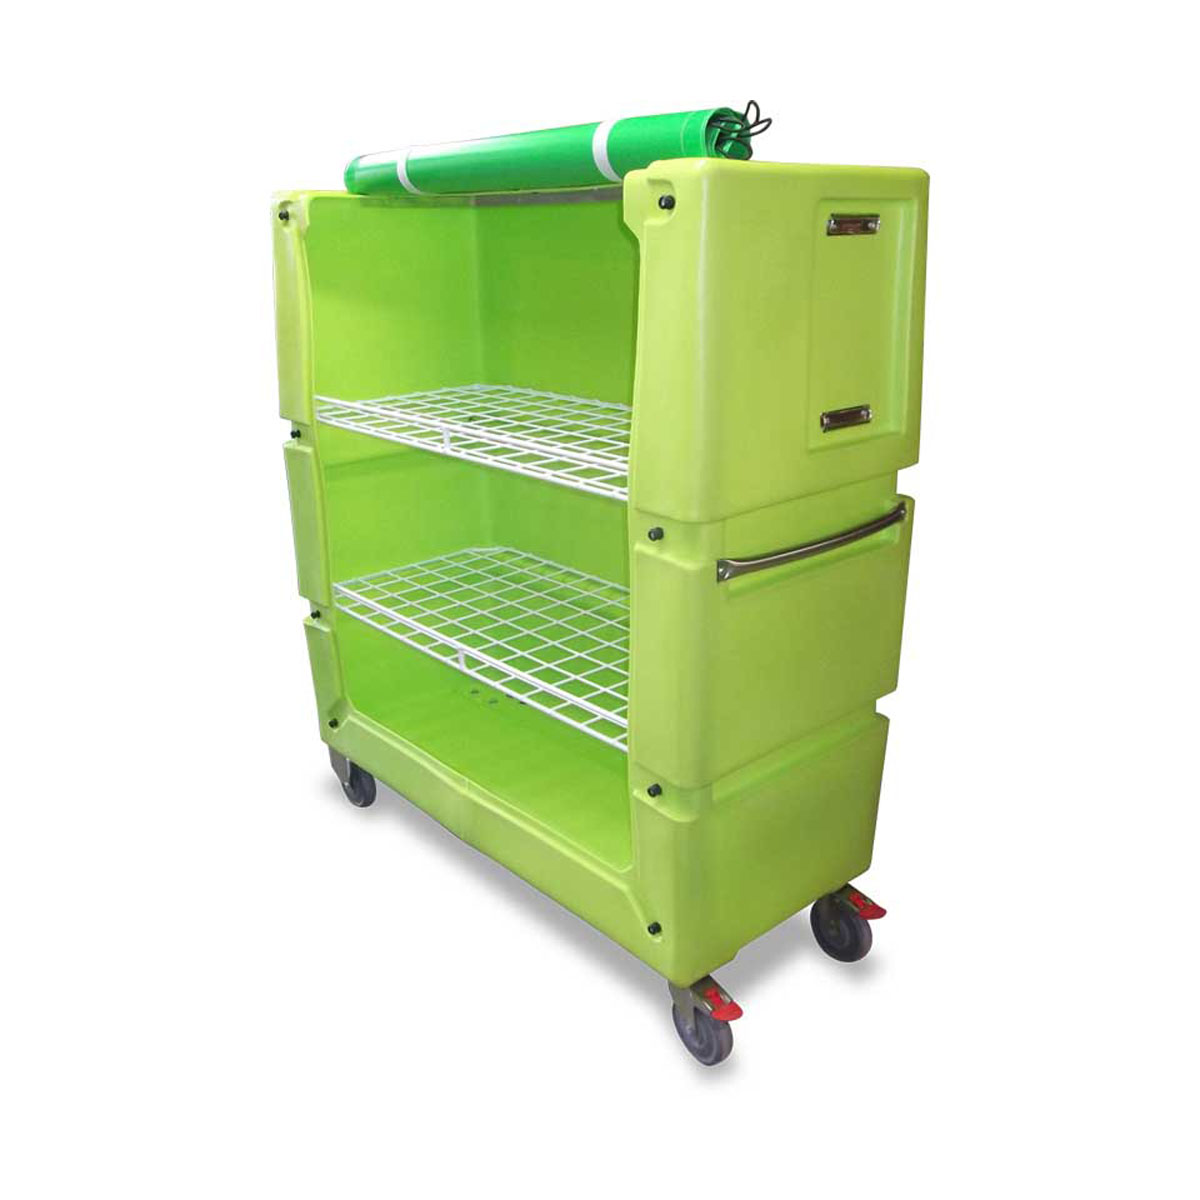 Buy Cargo Trolley (Ergopod - Plastic) in Cage Trolleys from Ergopod available at Astrolift NZ